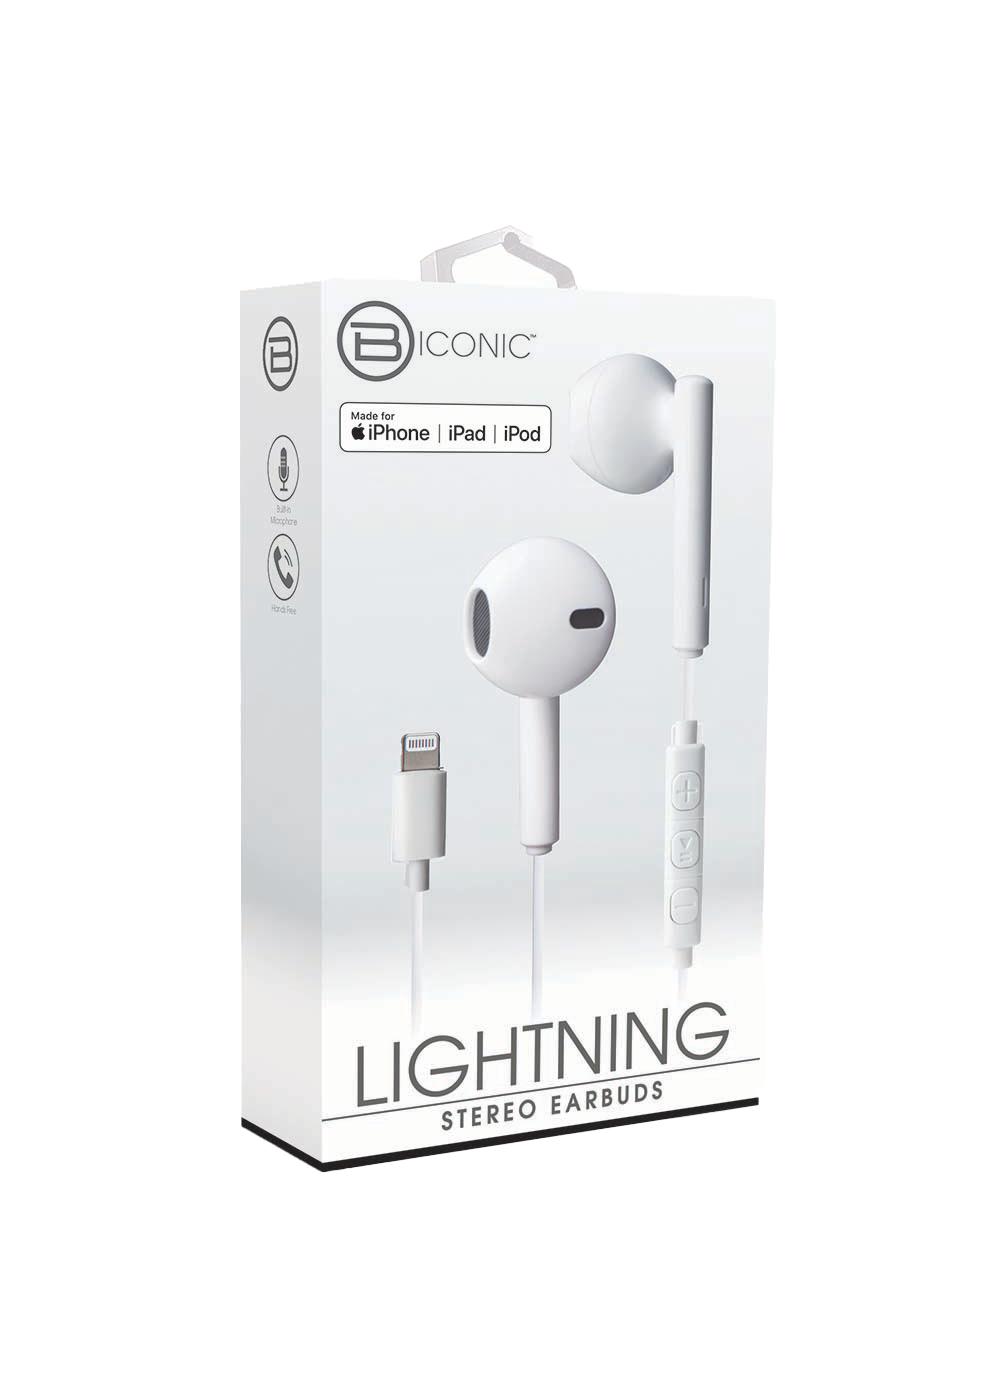 Biconic Lightning Stereo Earbuds - White; image 1 of 2